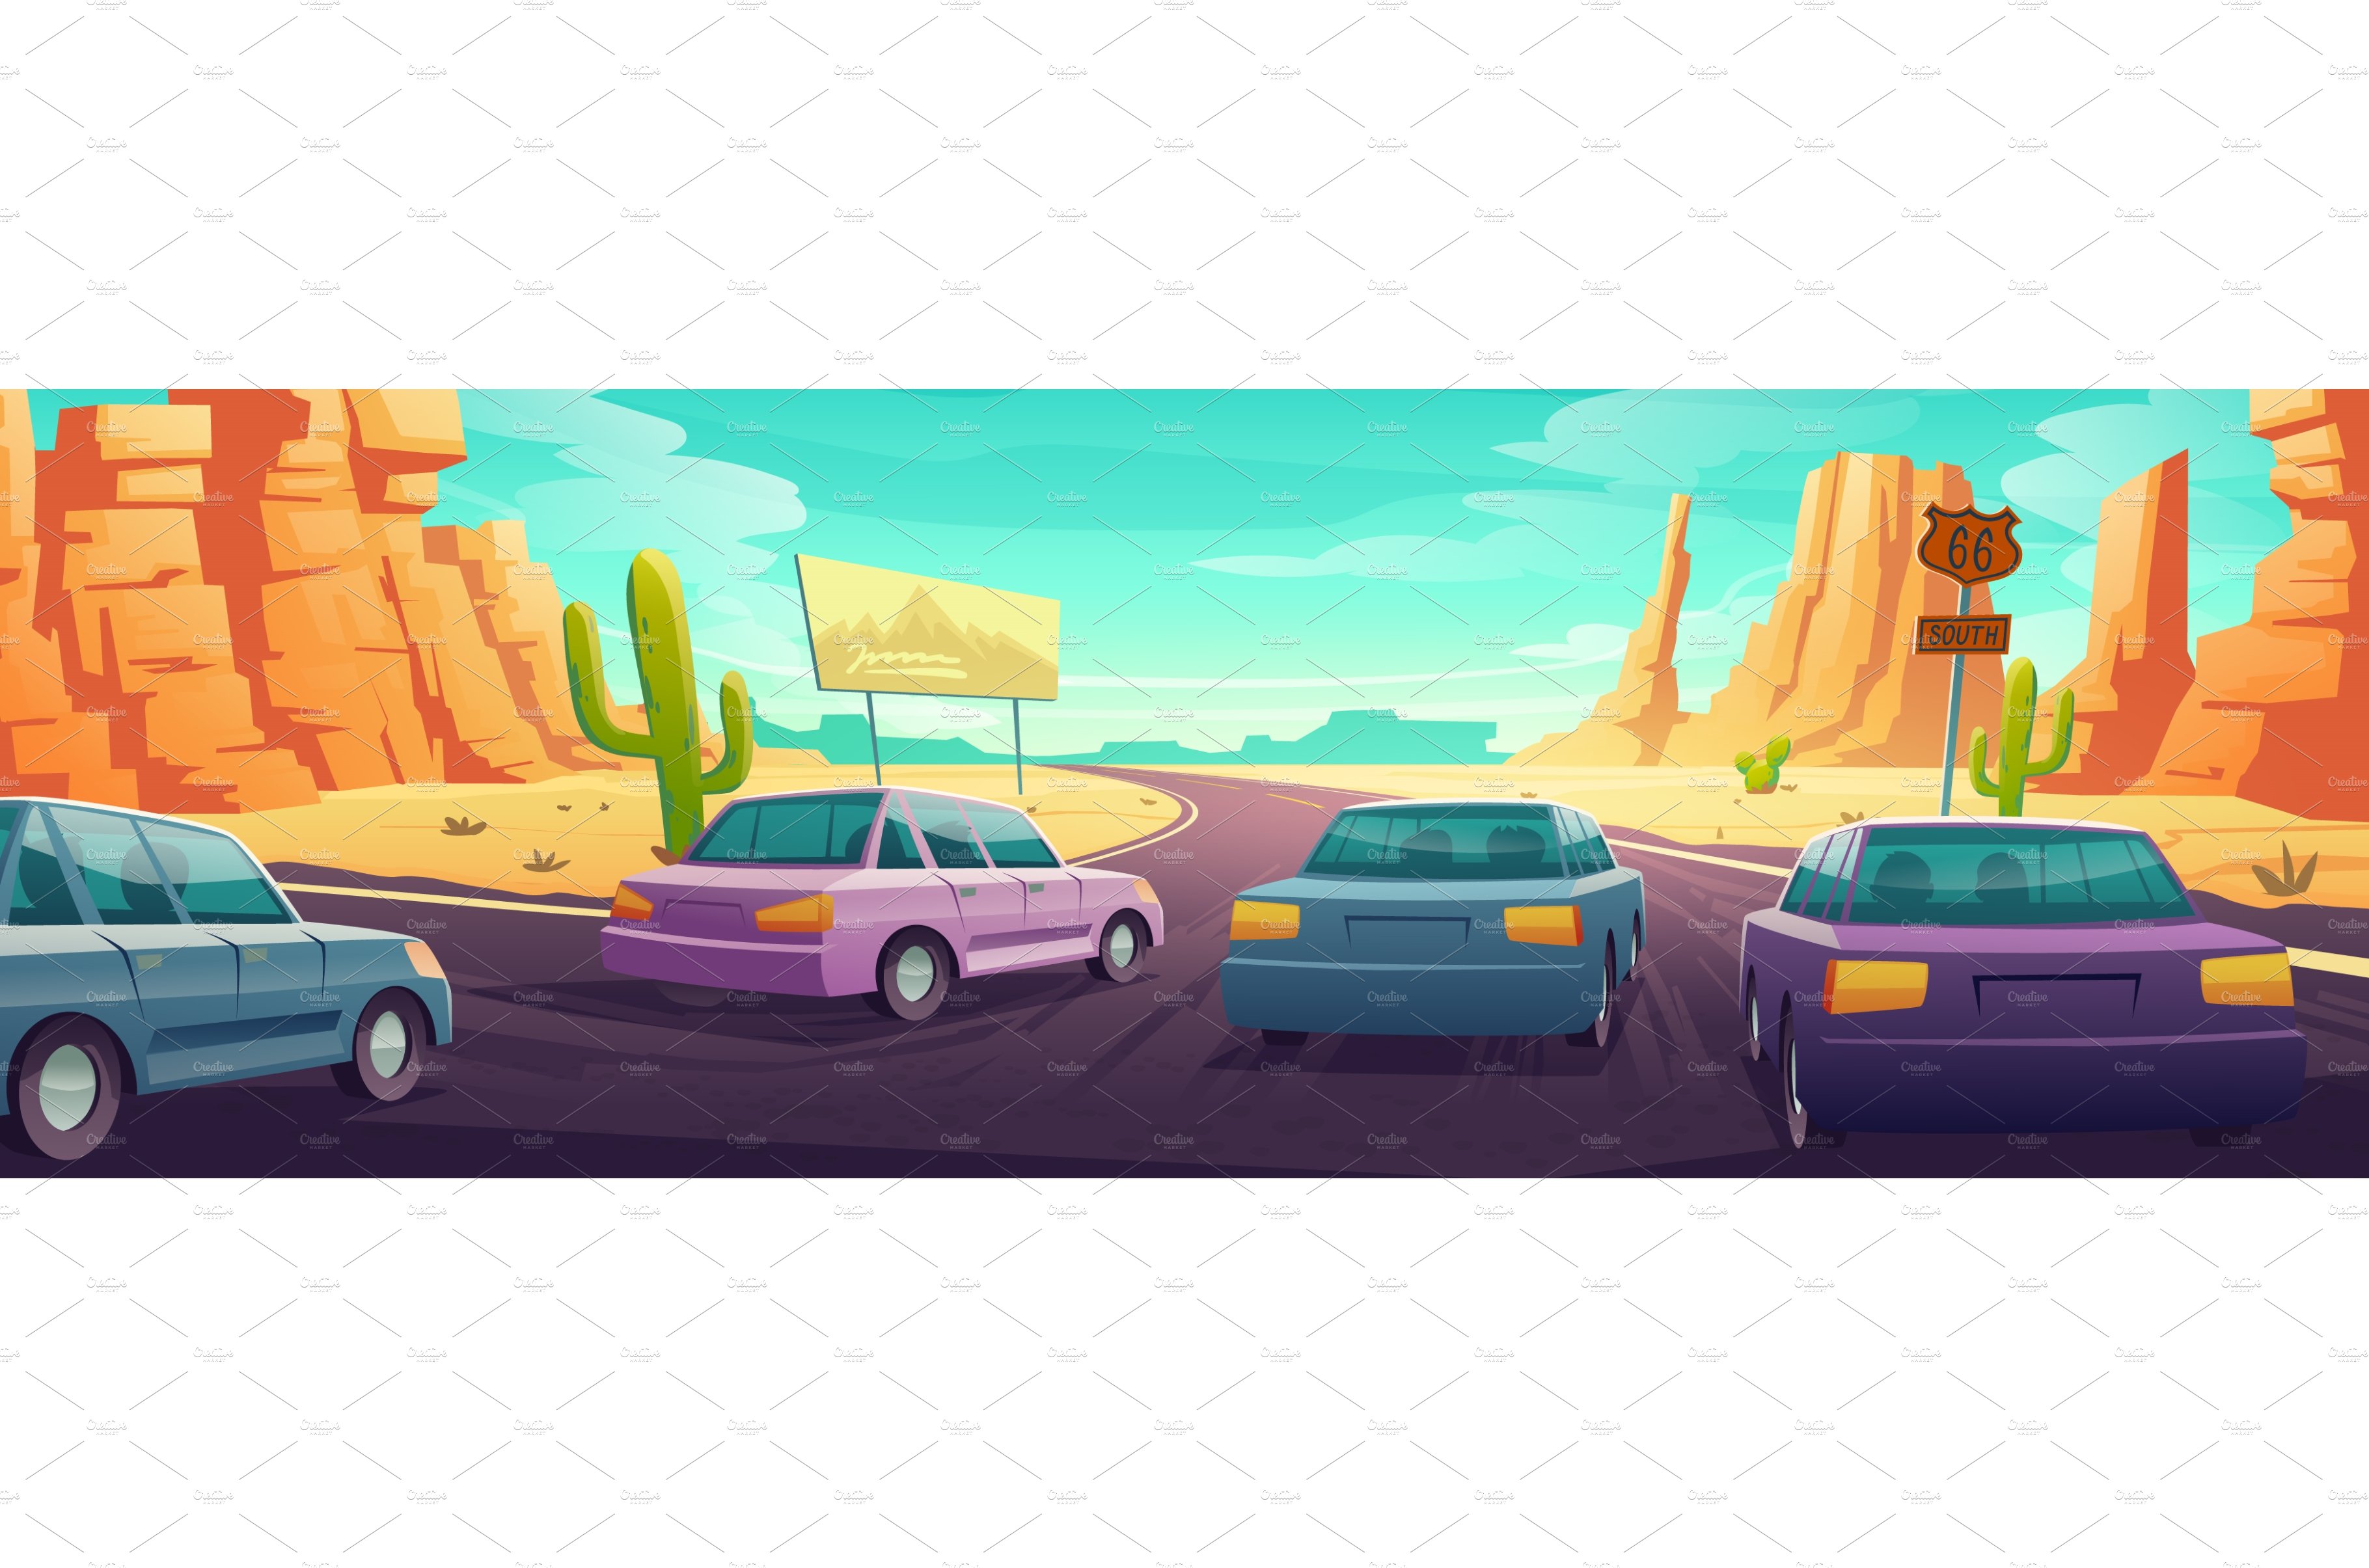 Desert landscape with cars drive on cover image.